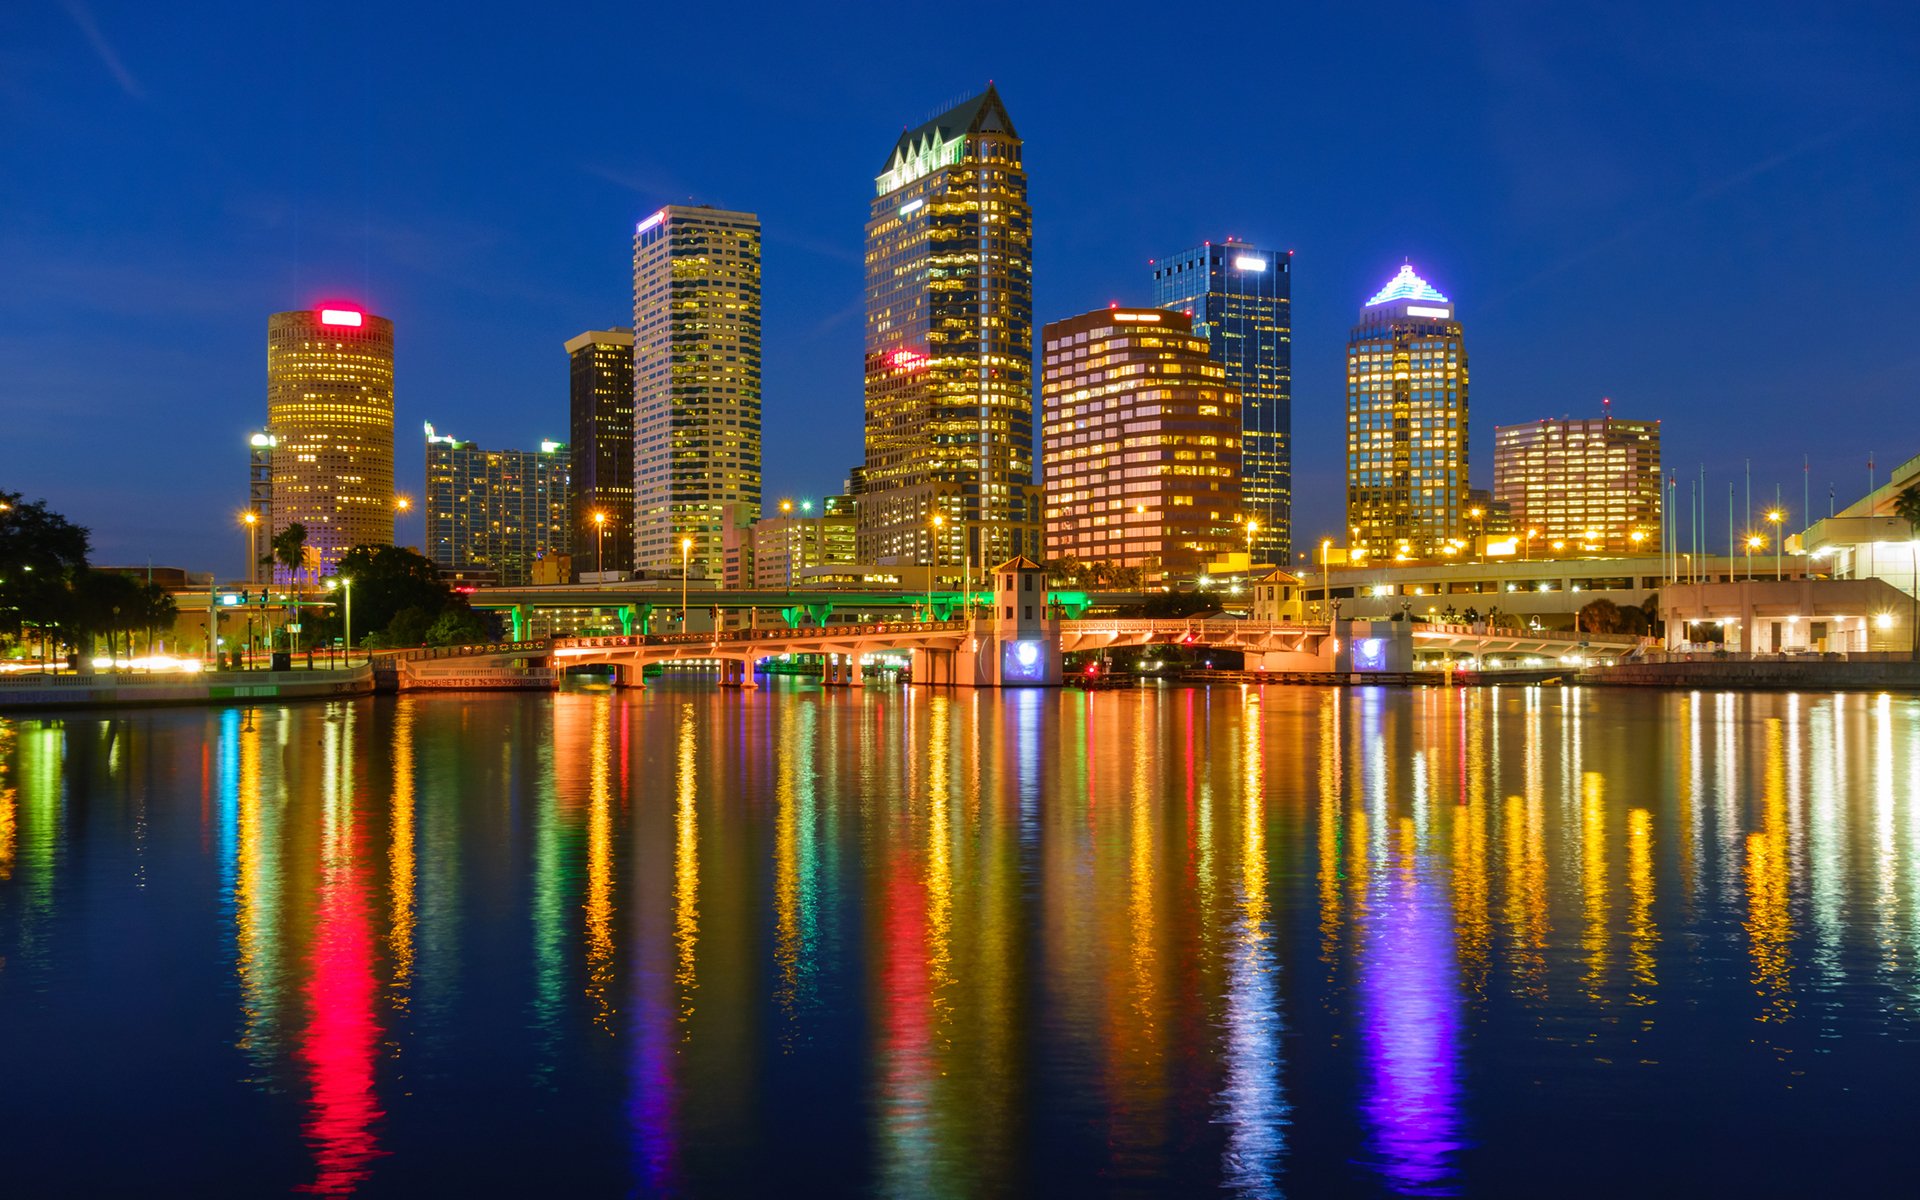 tampa-hd-wallpaper-background-image-1920x1200